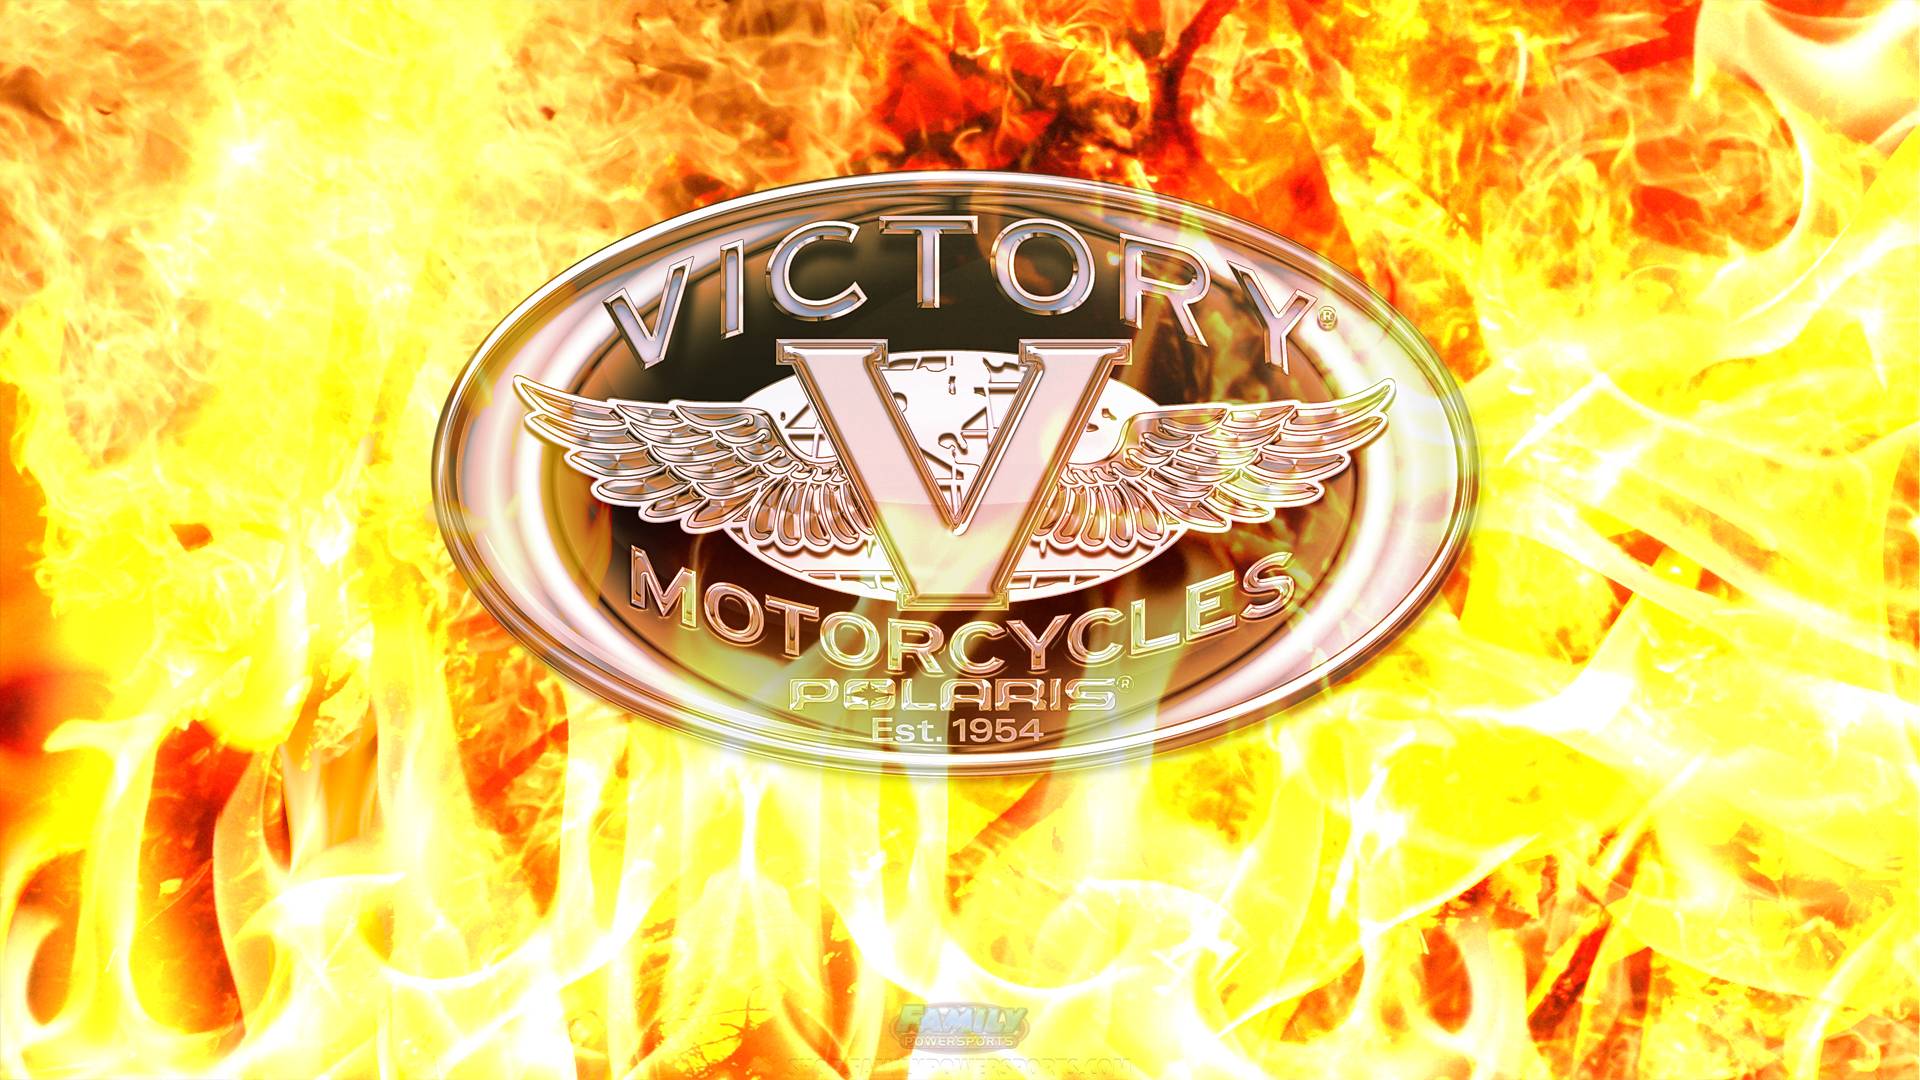 Victory Motorcycles Logo Wallpaper On